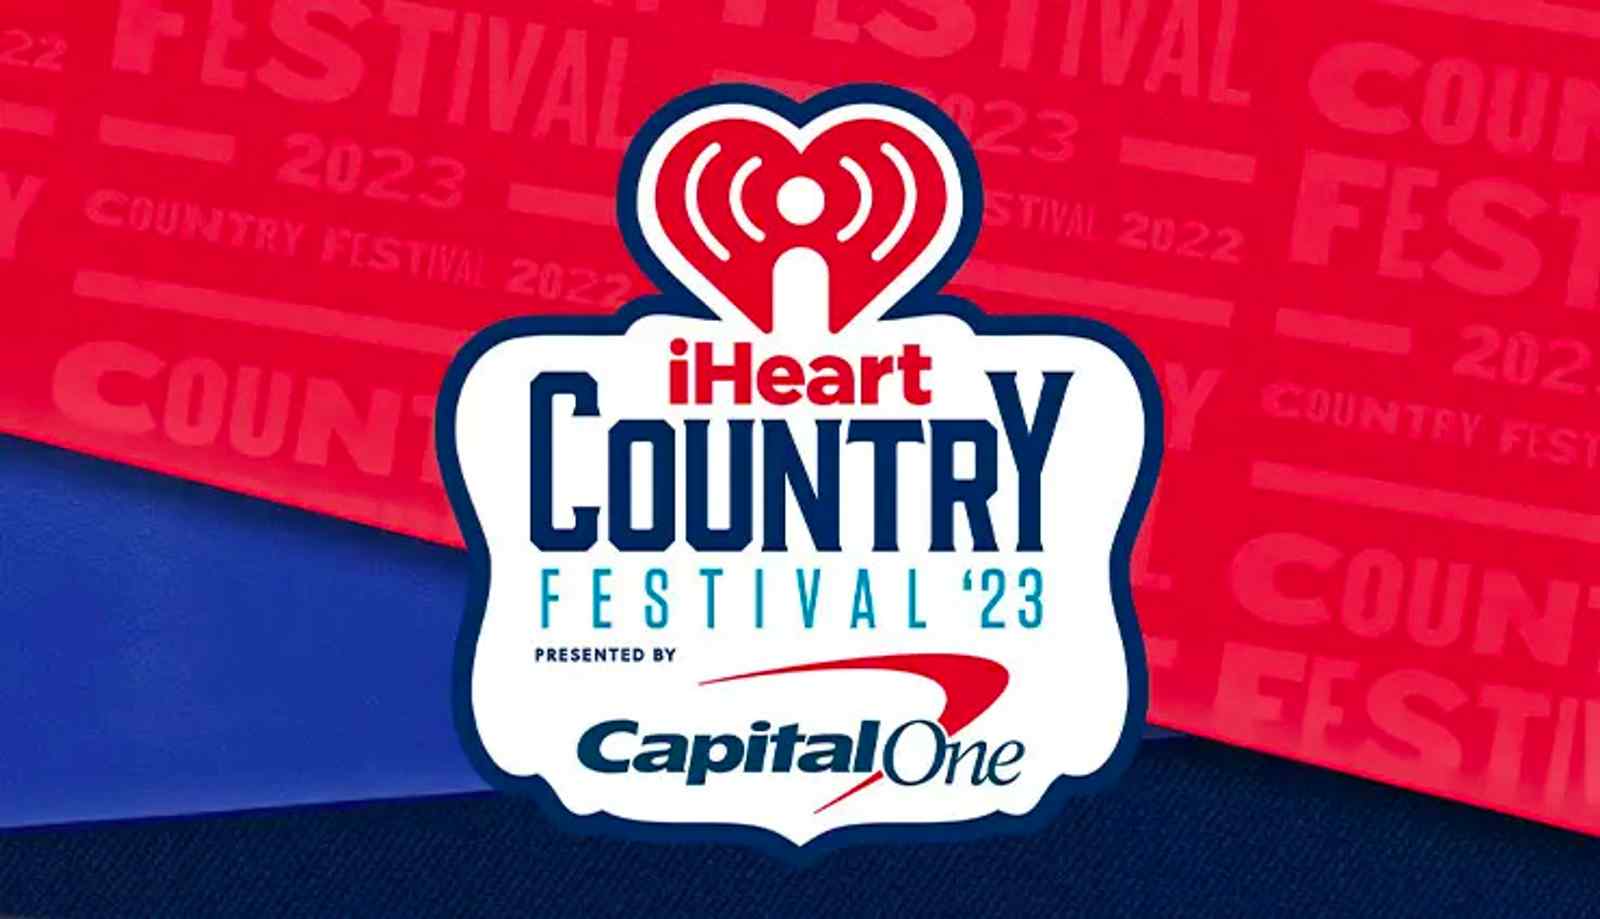 Luke Bryan, Kane Brown, Sam Hunt, Elle King, Parker McCollum, Justin Moore, Jordan Davis, Mitchell Tenpenny, and More Lead Lineup for the 2023 “iHeartCountry Festival Presented by Capital One”